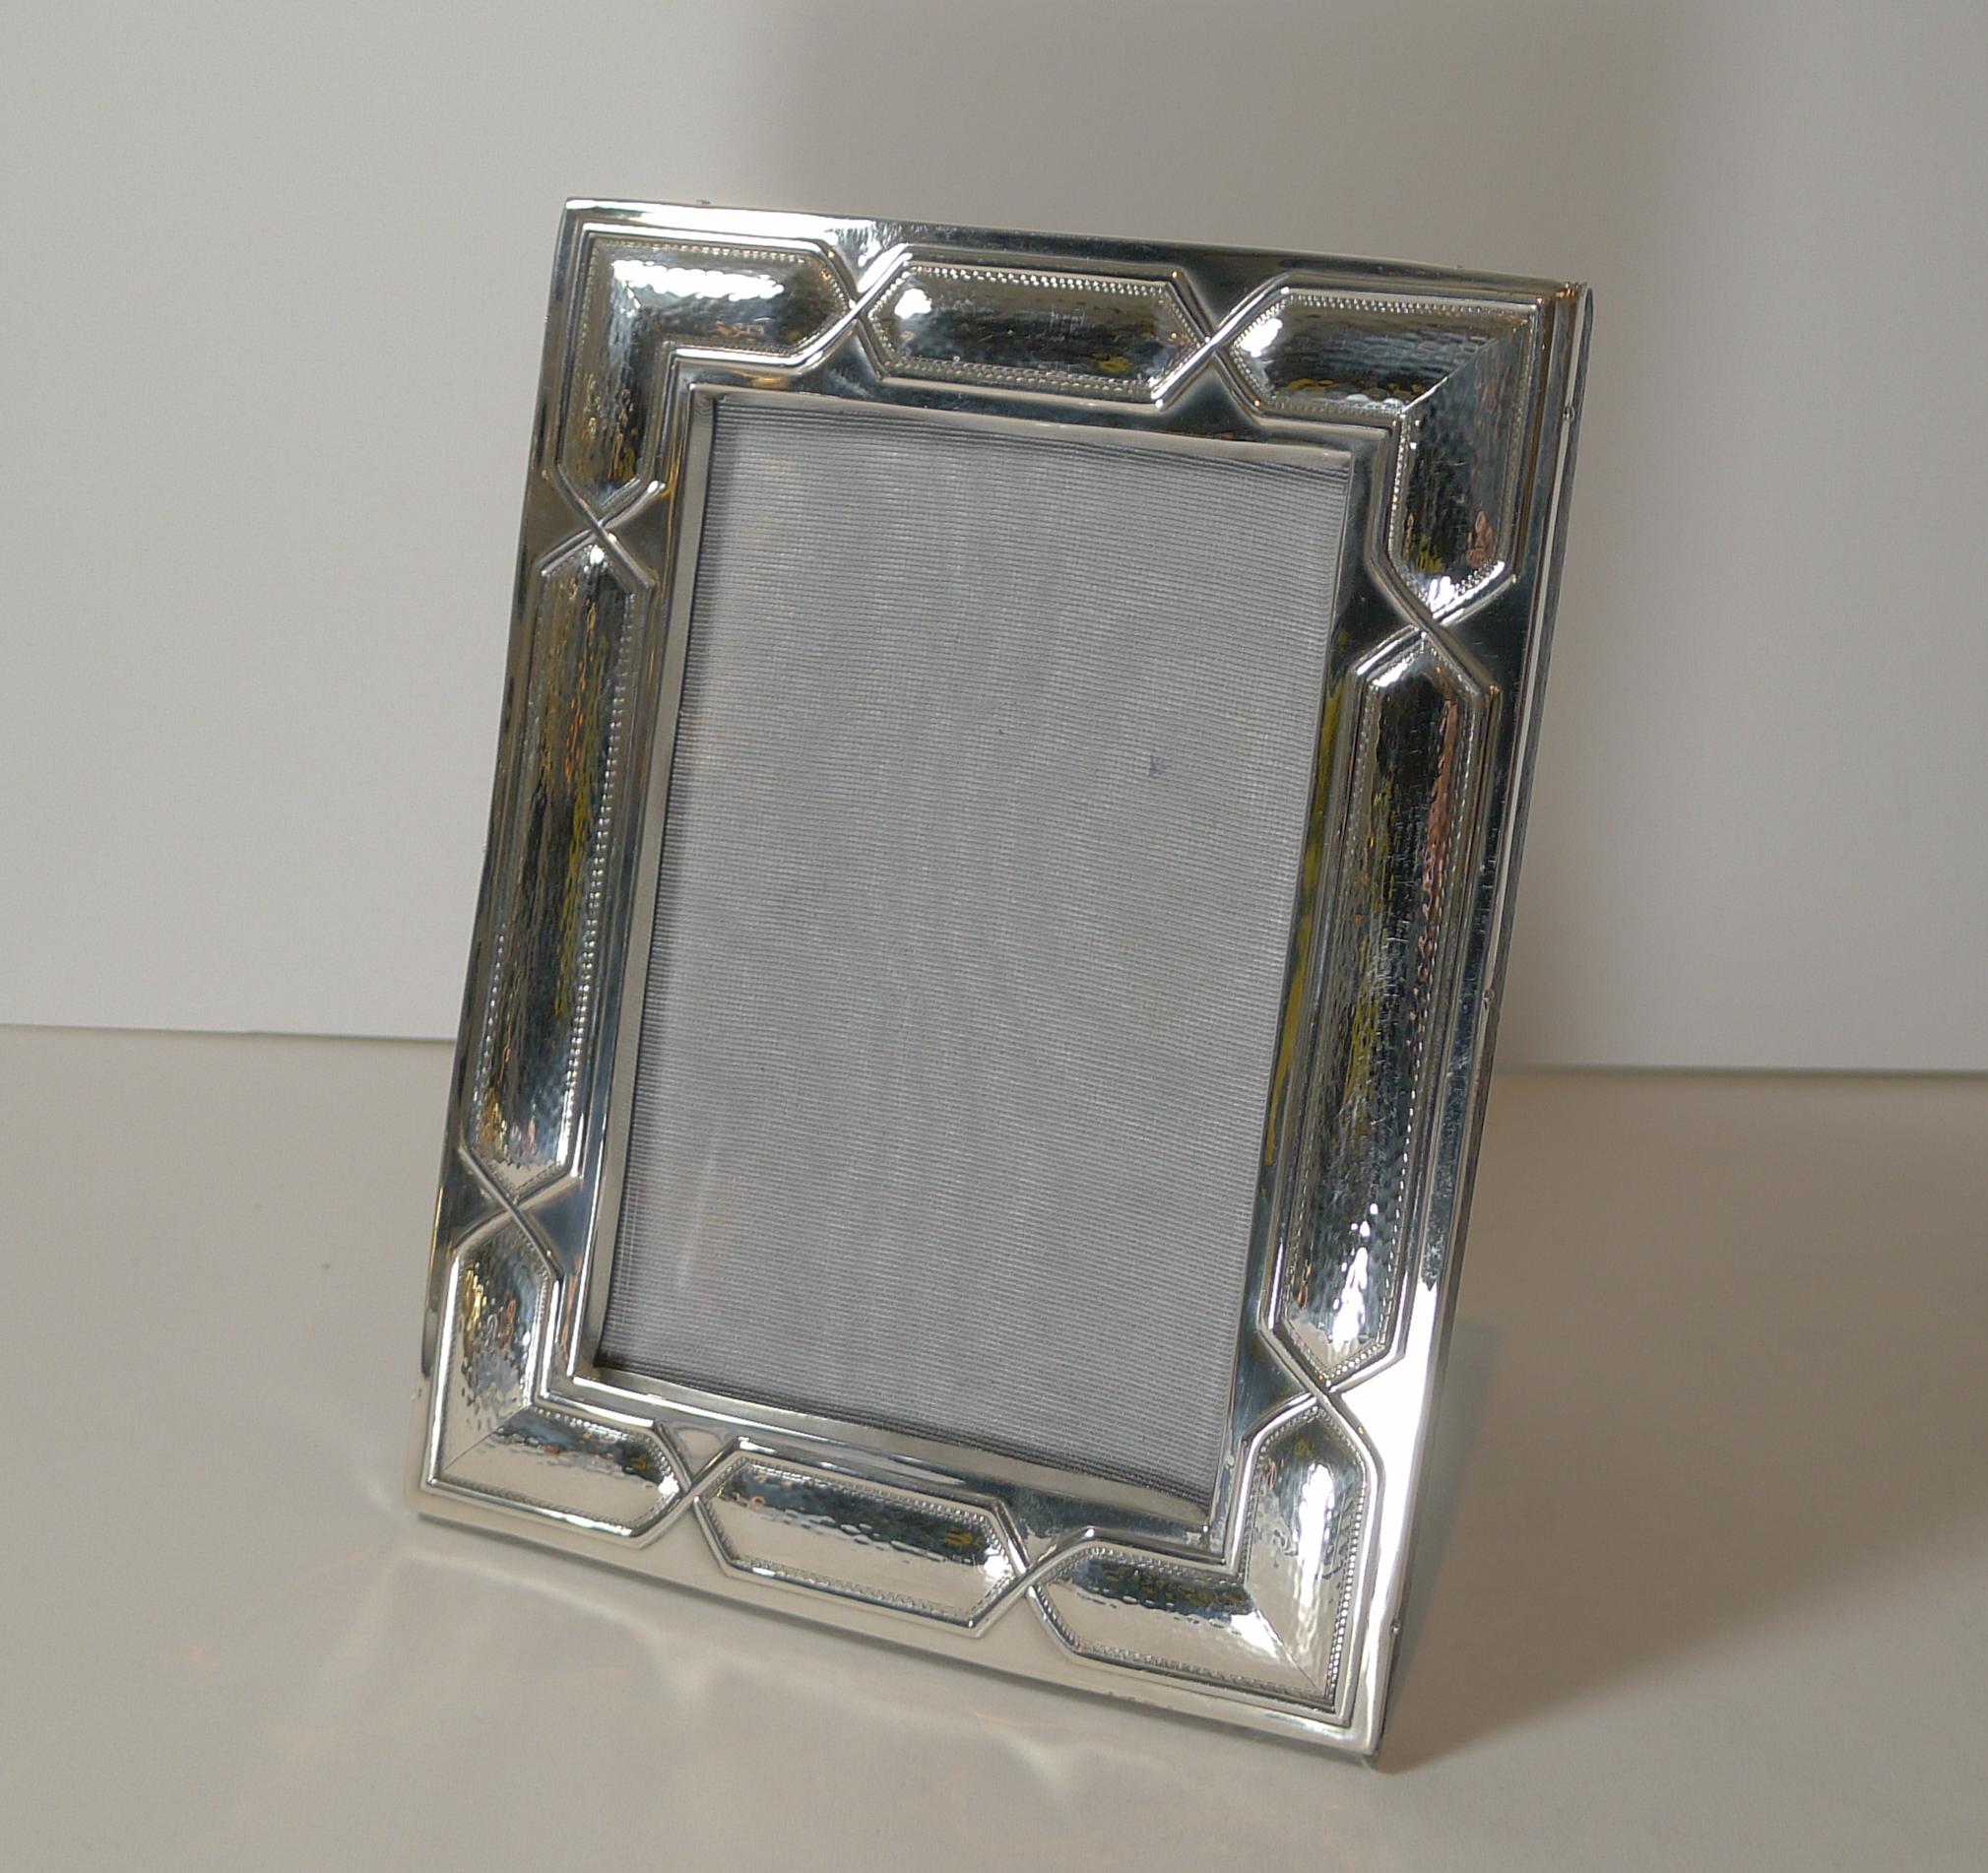 Edwardian Unusual Antique English Sterling Silver Photograph / Picture Frame, 1907